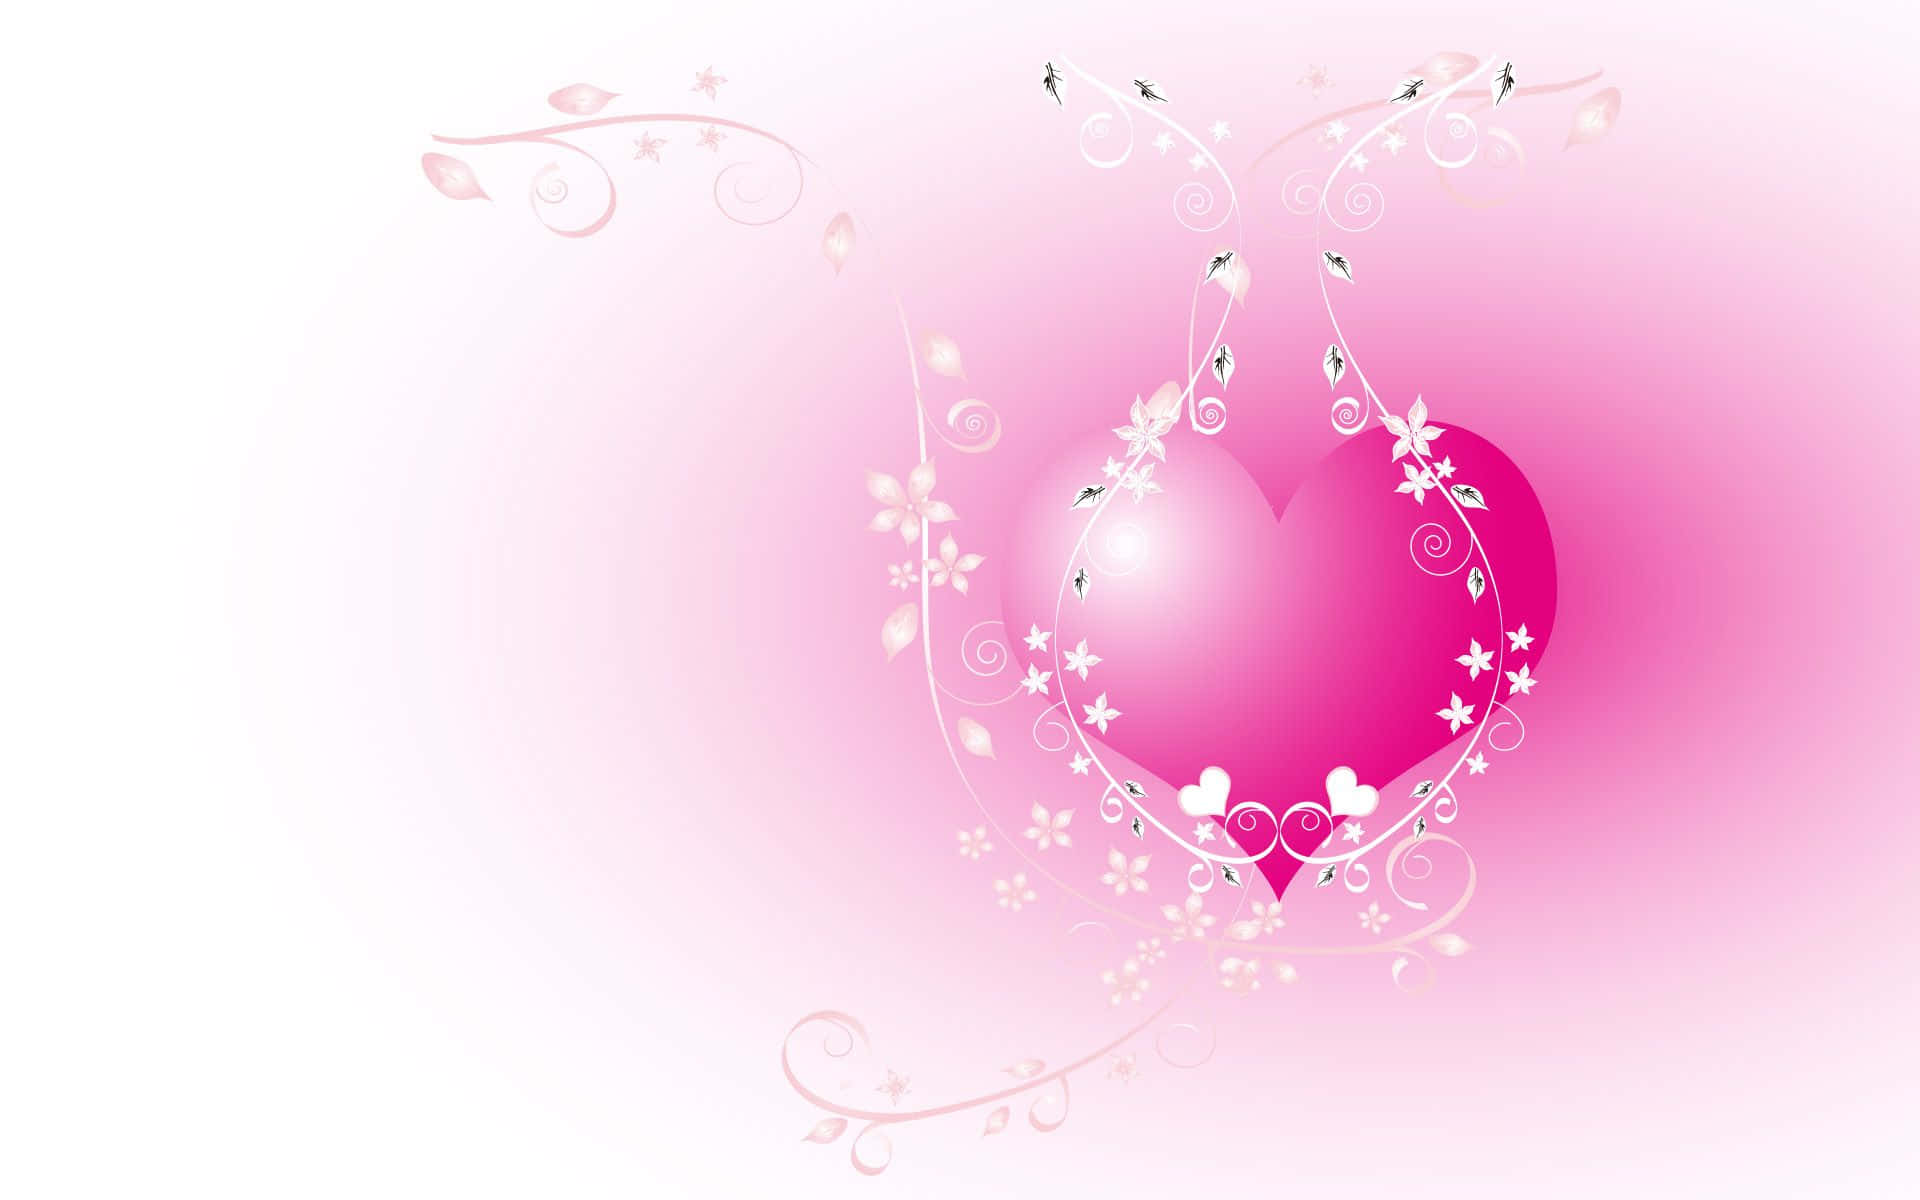 A Pink Heart With Floral Designs On It Wallpaper